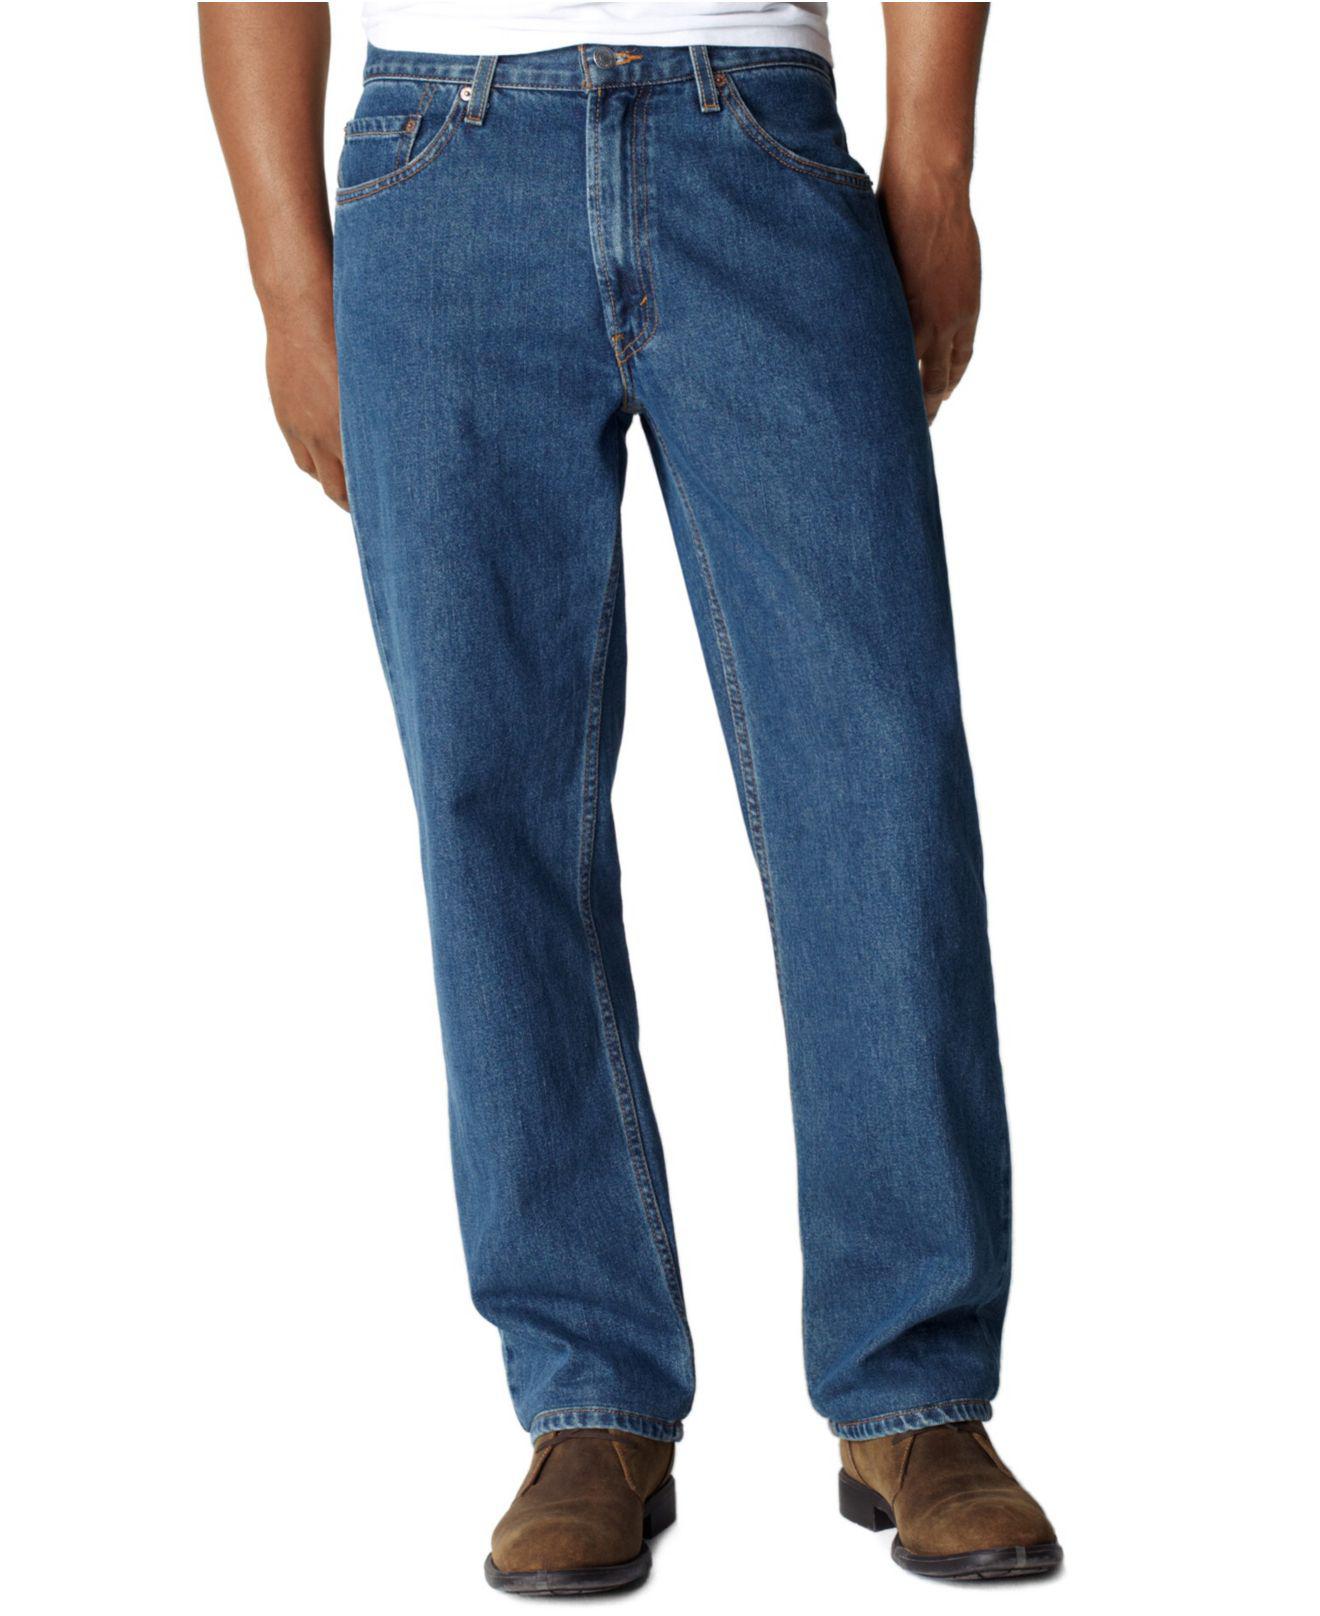 levis big and tall jeans